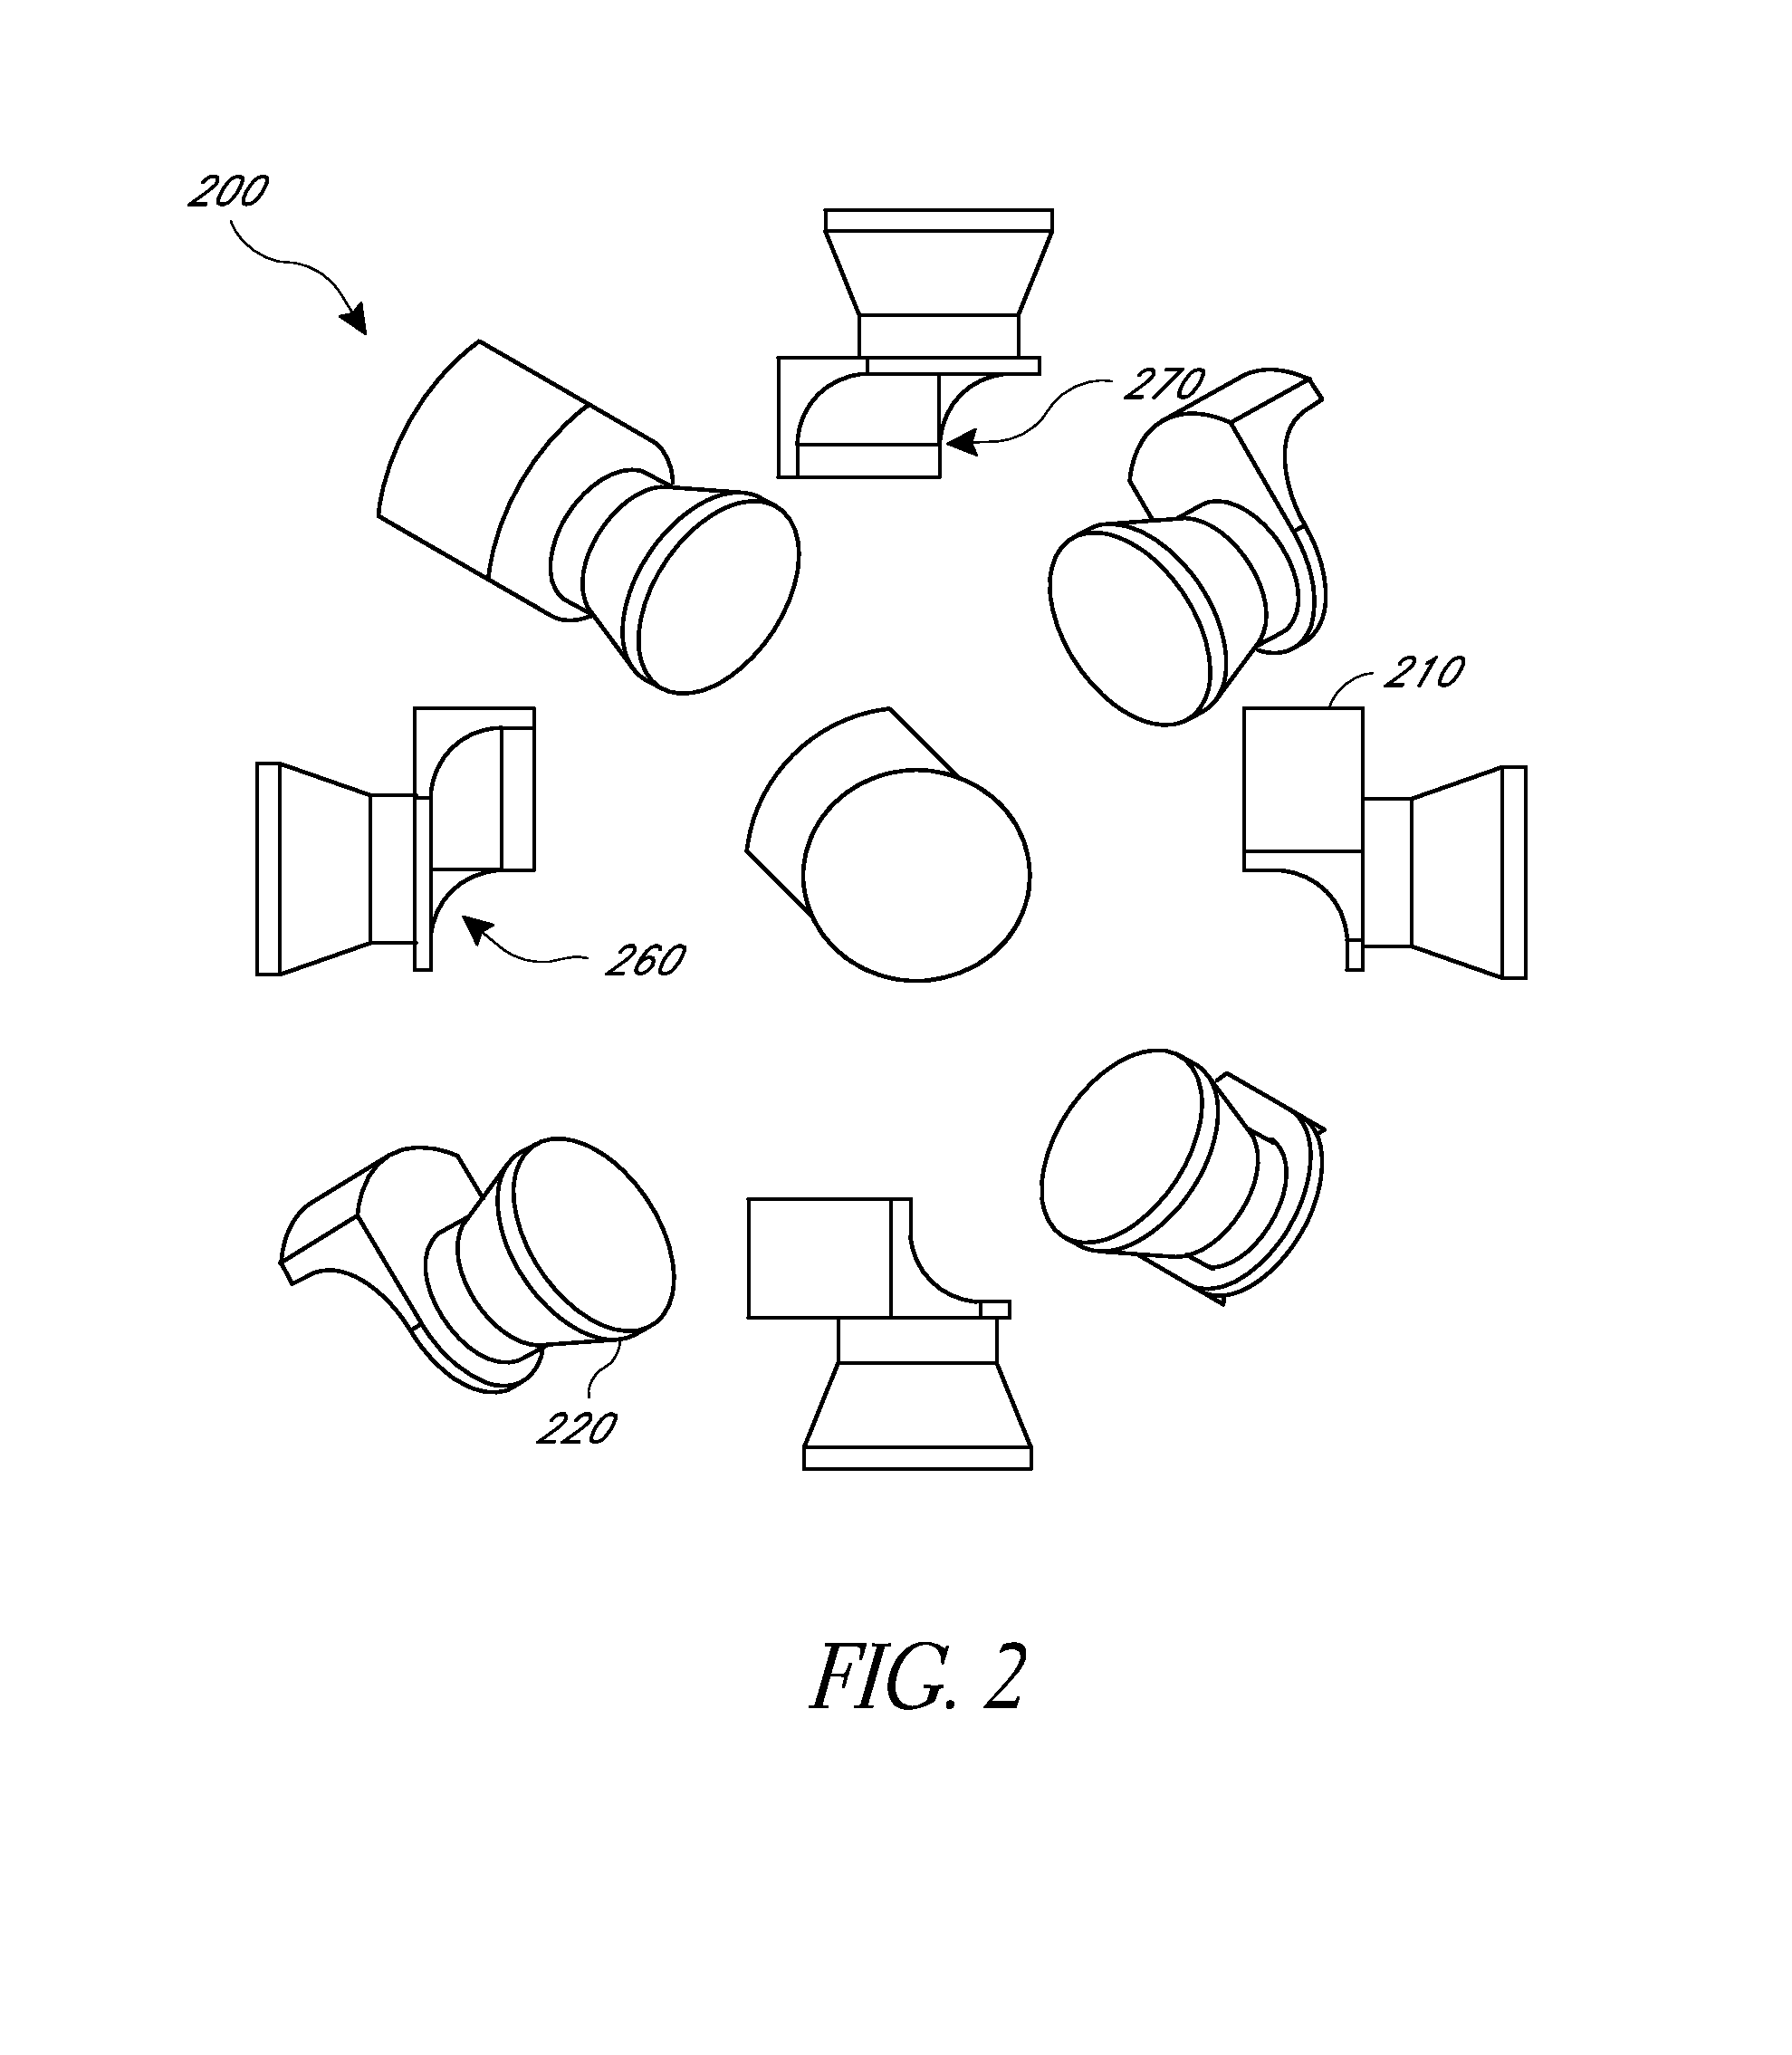 Removable optical devices for mobile electronic devices